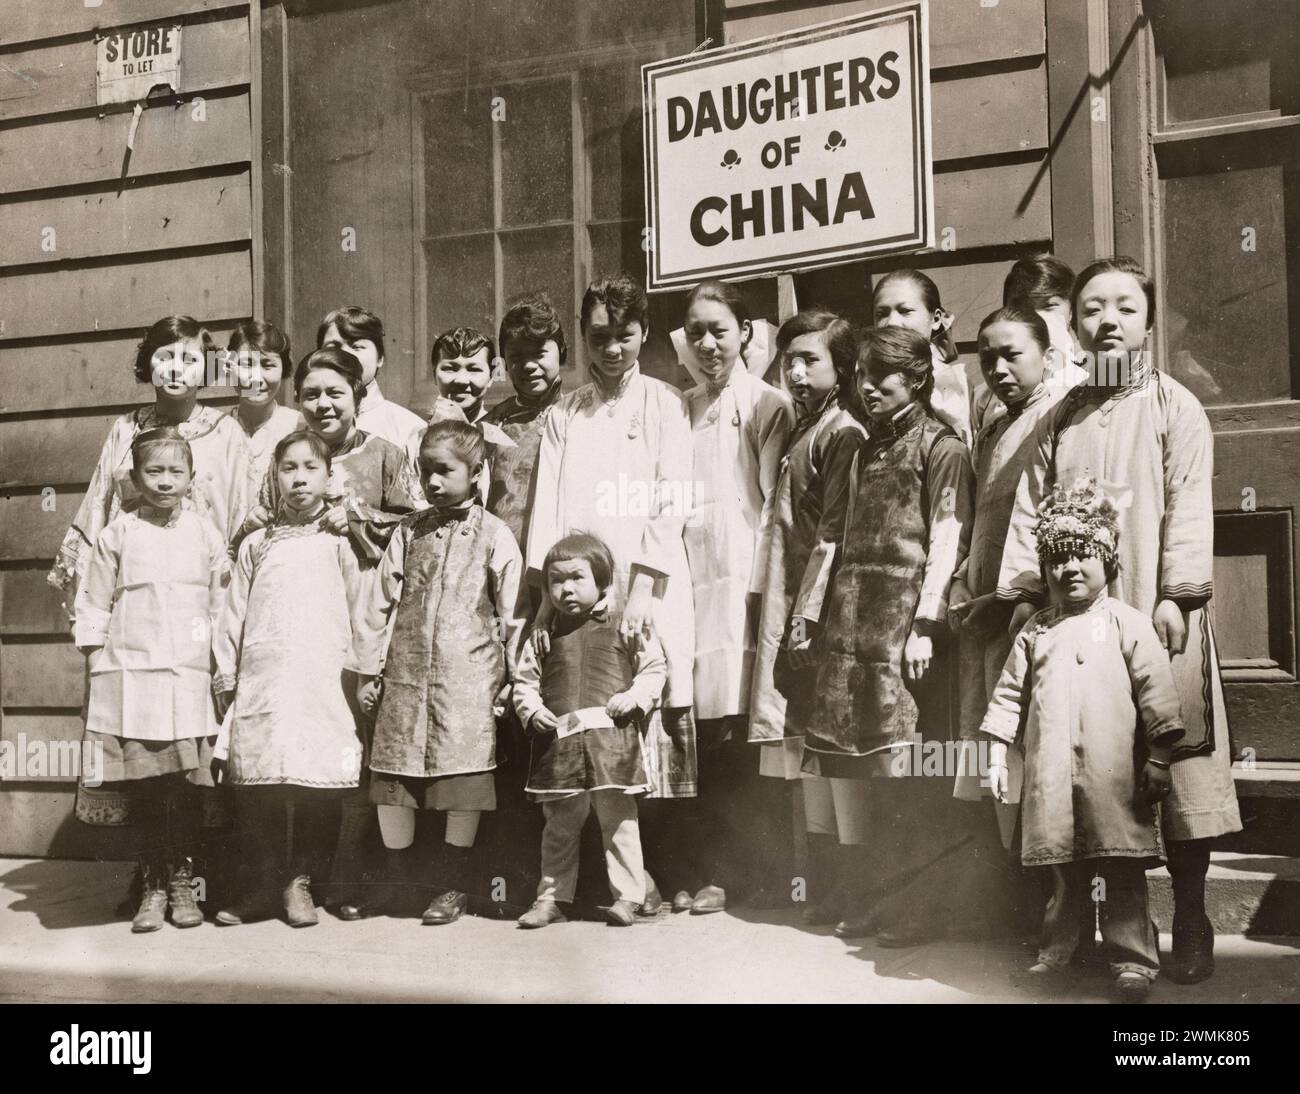 Liberty Bonds - Personnel - Solicitations - 3rd Campaign - CHINESE GIRLS WORKING FOR THIRD LIBERTY LOAN. The Daughters of China, an organization composed entirely of young Chinese women residing in New York, pledged themselves to sell $500.00 worth of bonds each. They held daily rallies in Chinatown Stock Photo